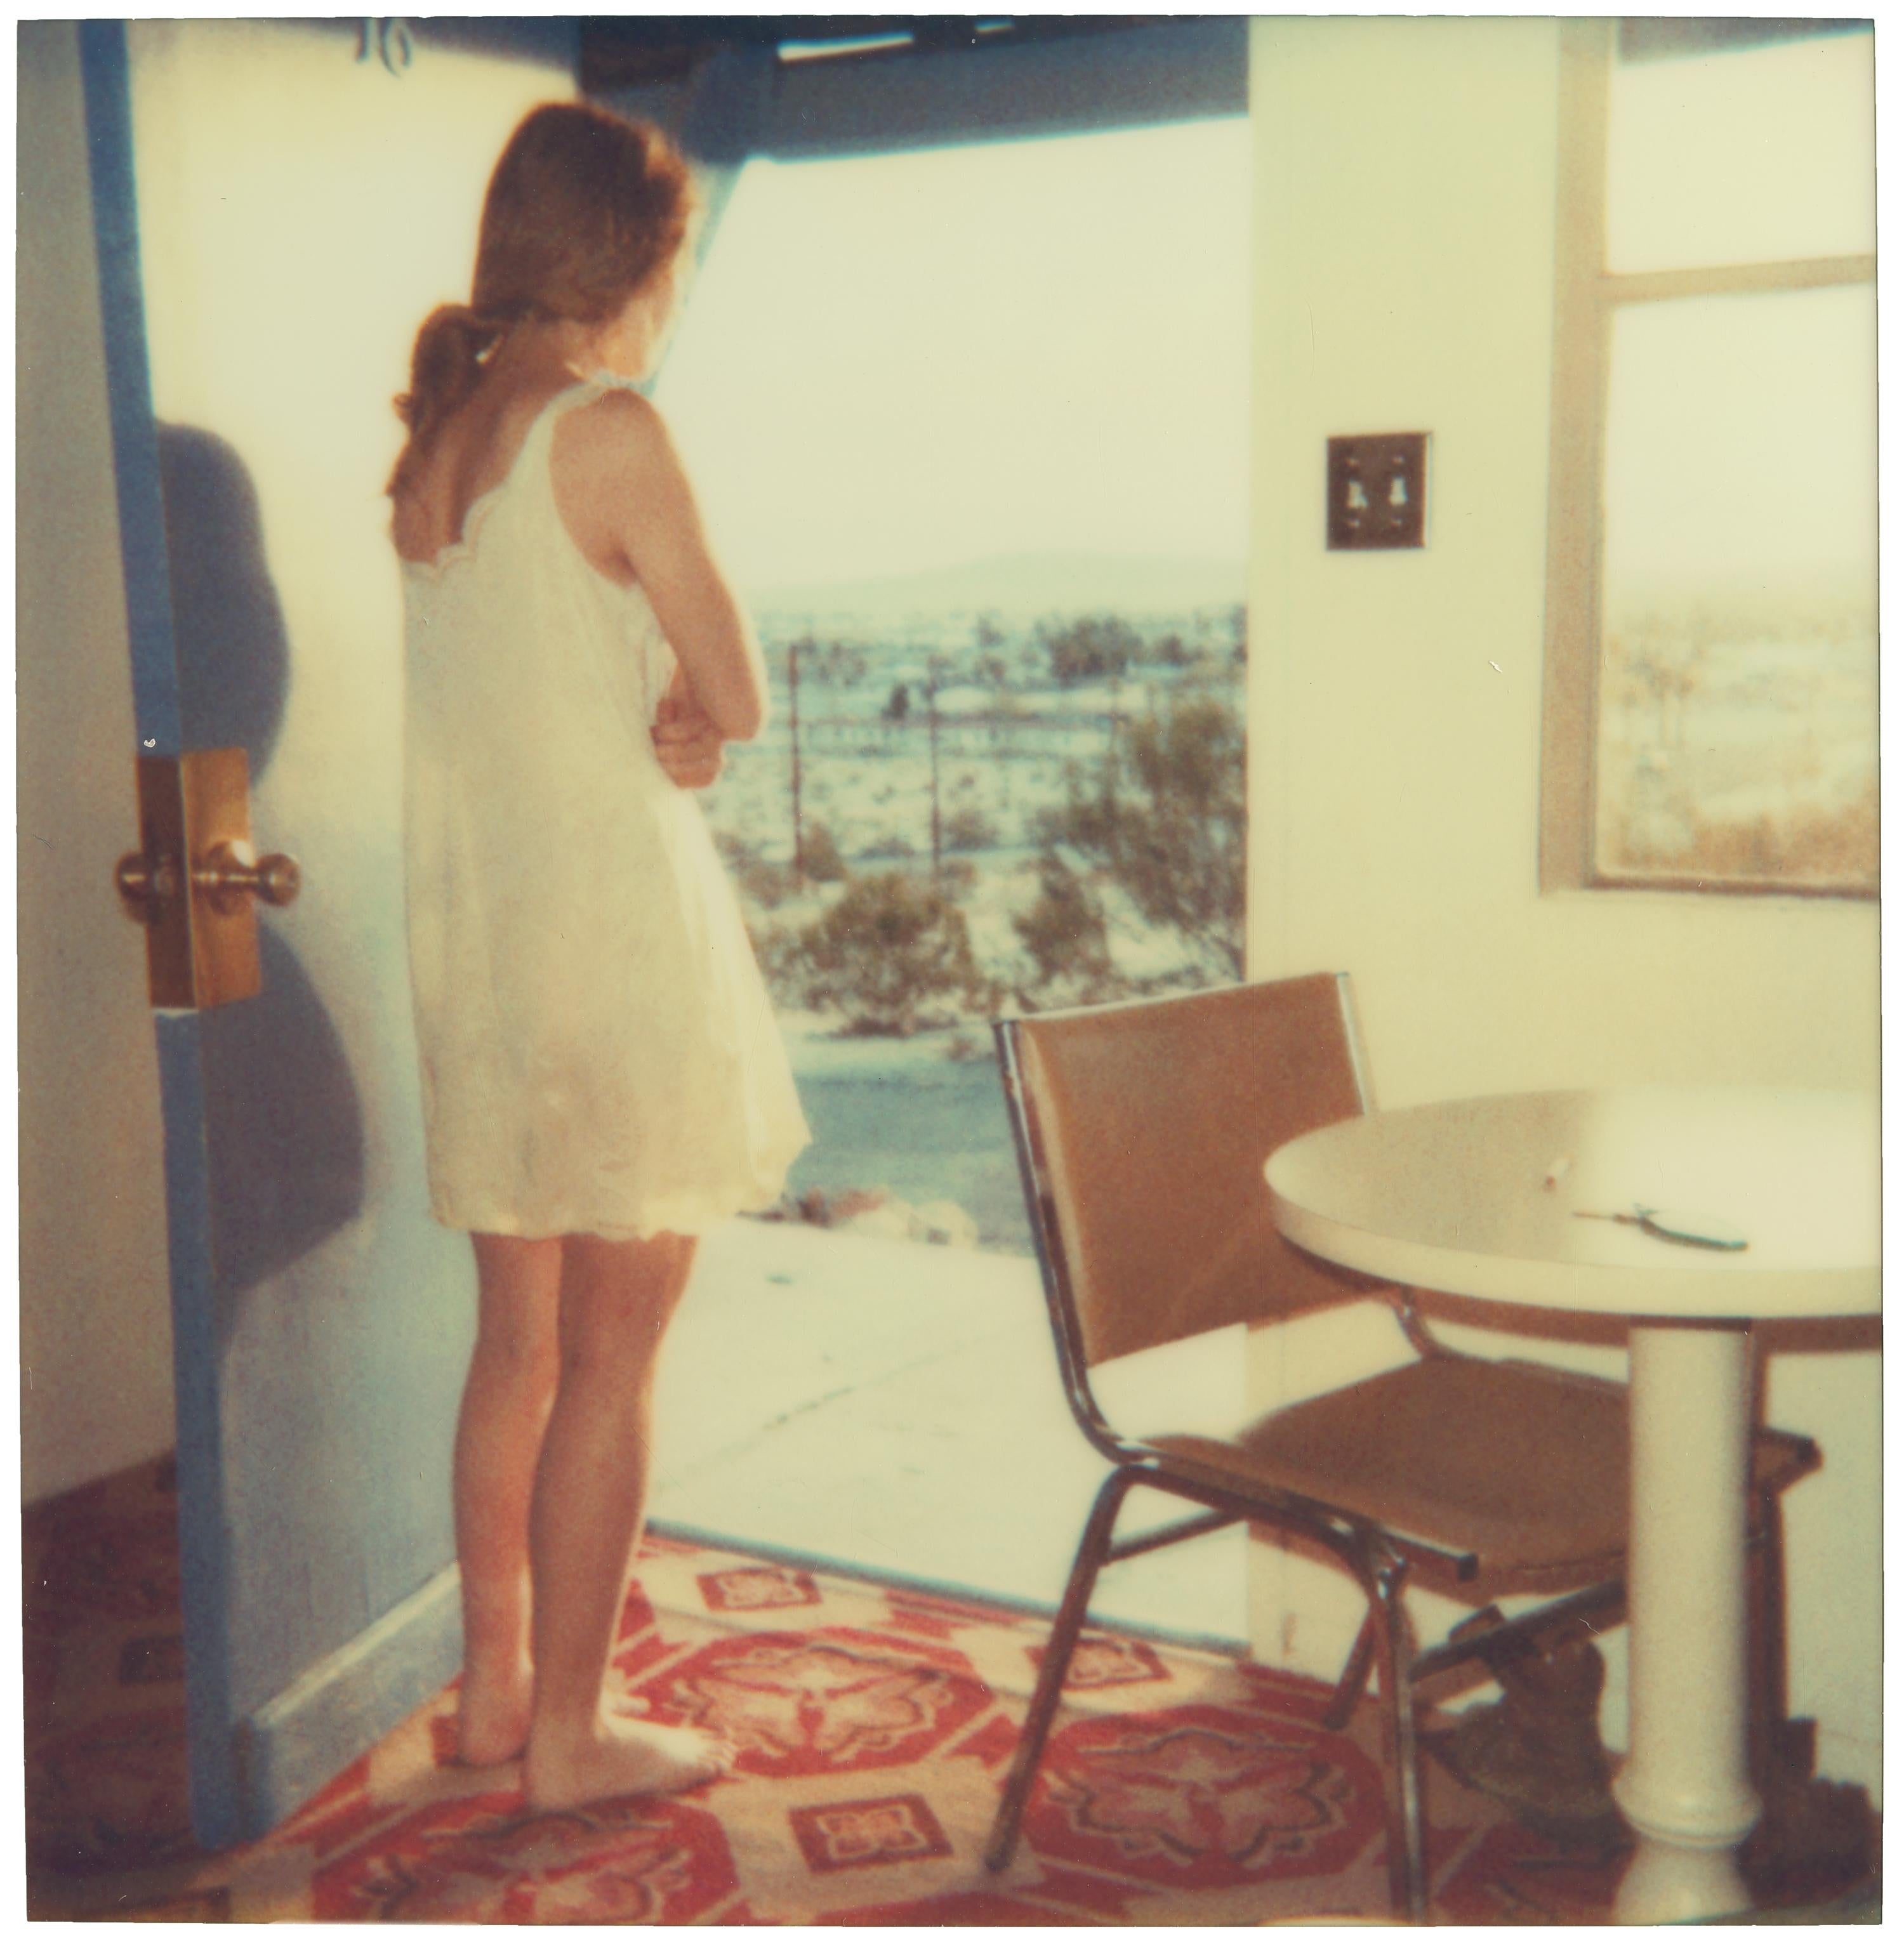 Hillview Motel (Last Picture Show) - analog, mounted, based on 3 Polaroids - Contemporary Photograph by Stefanie Schneider